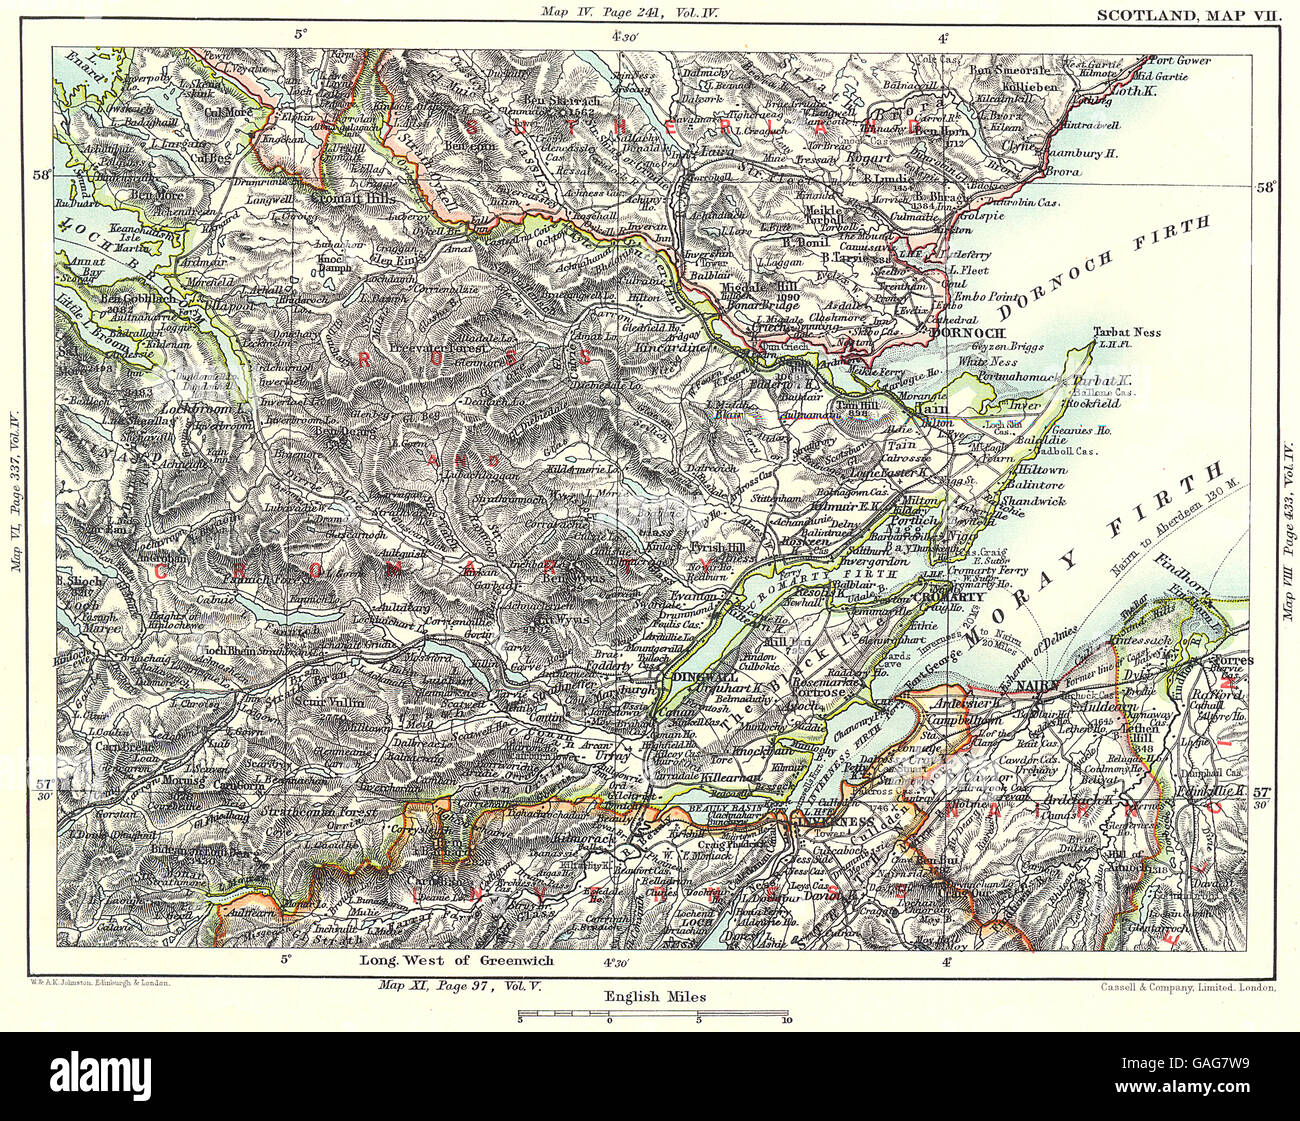 SCOTTISH HIGHLANDS: Ross/Cromarty Moray Firth Inverness Nairn Dingwall 1893 map Stock Photo